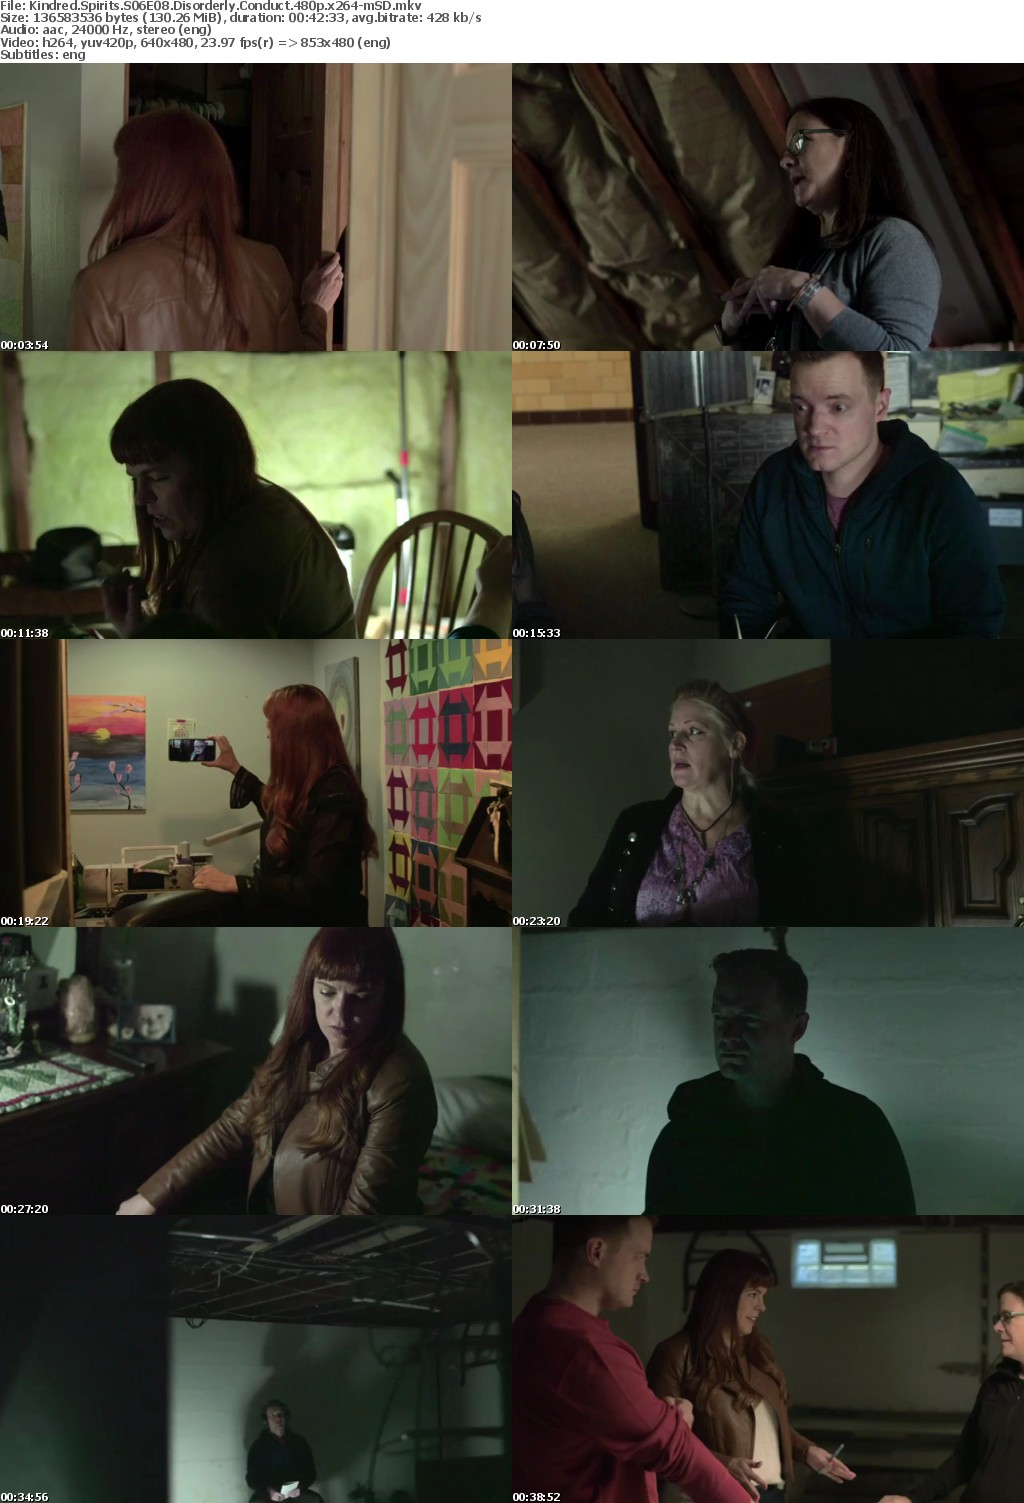 Kindred Spirits S06E08 Disorderly Conduct 480p x264-mSD